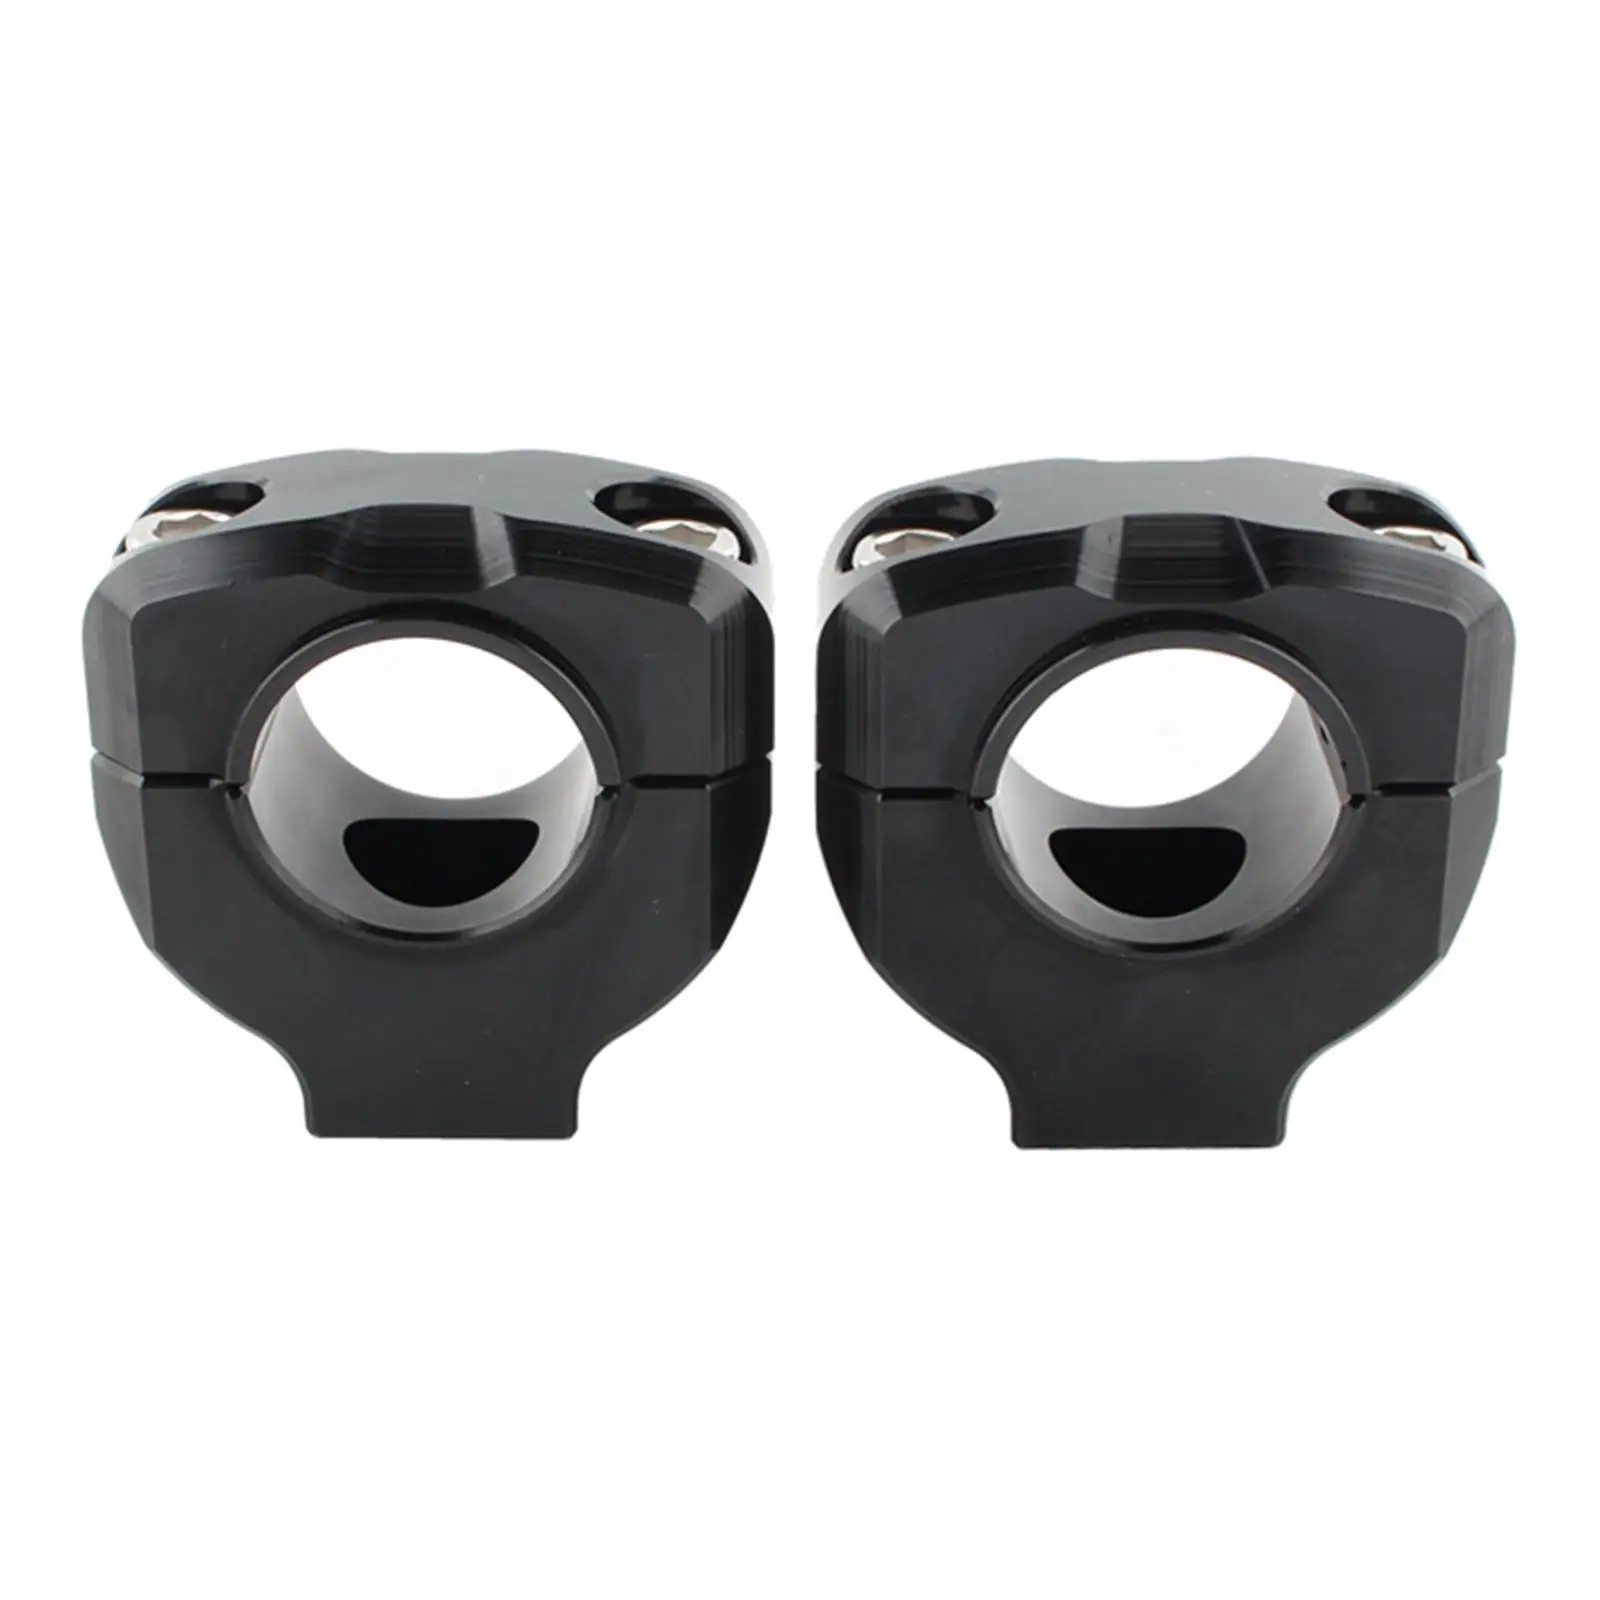 1 pair of universal motorcycle 28mm 1/8 inch handlebar riser clamp   Lifter - £16.78 GBP